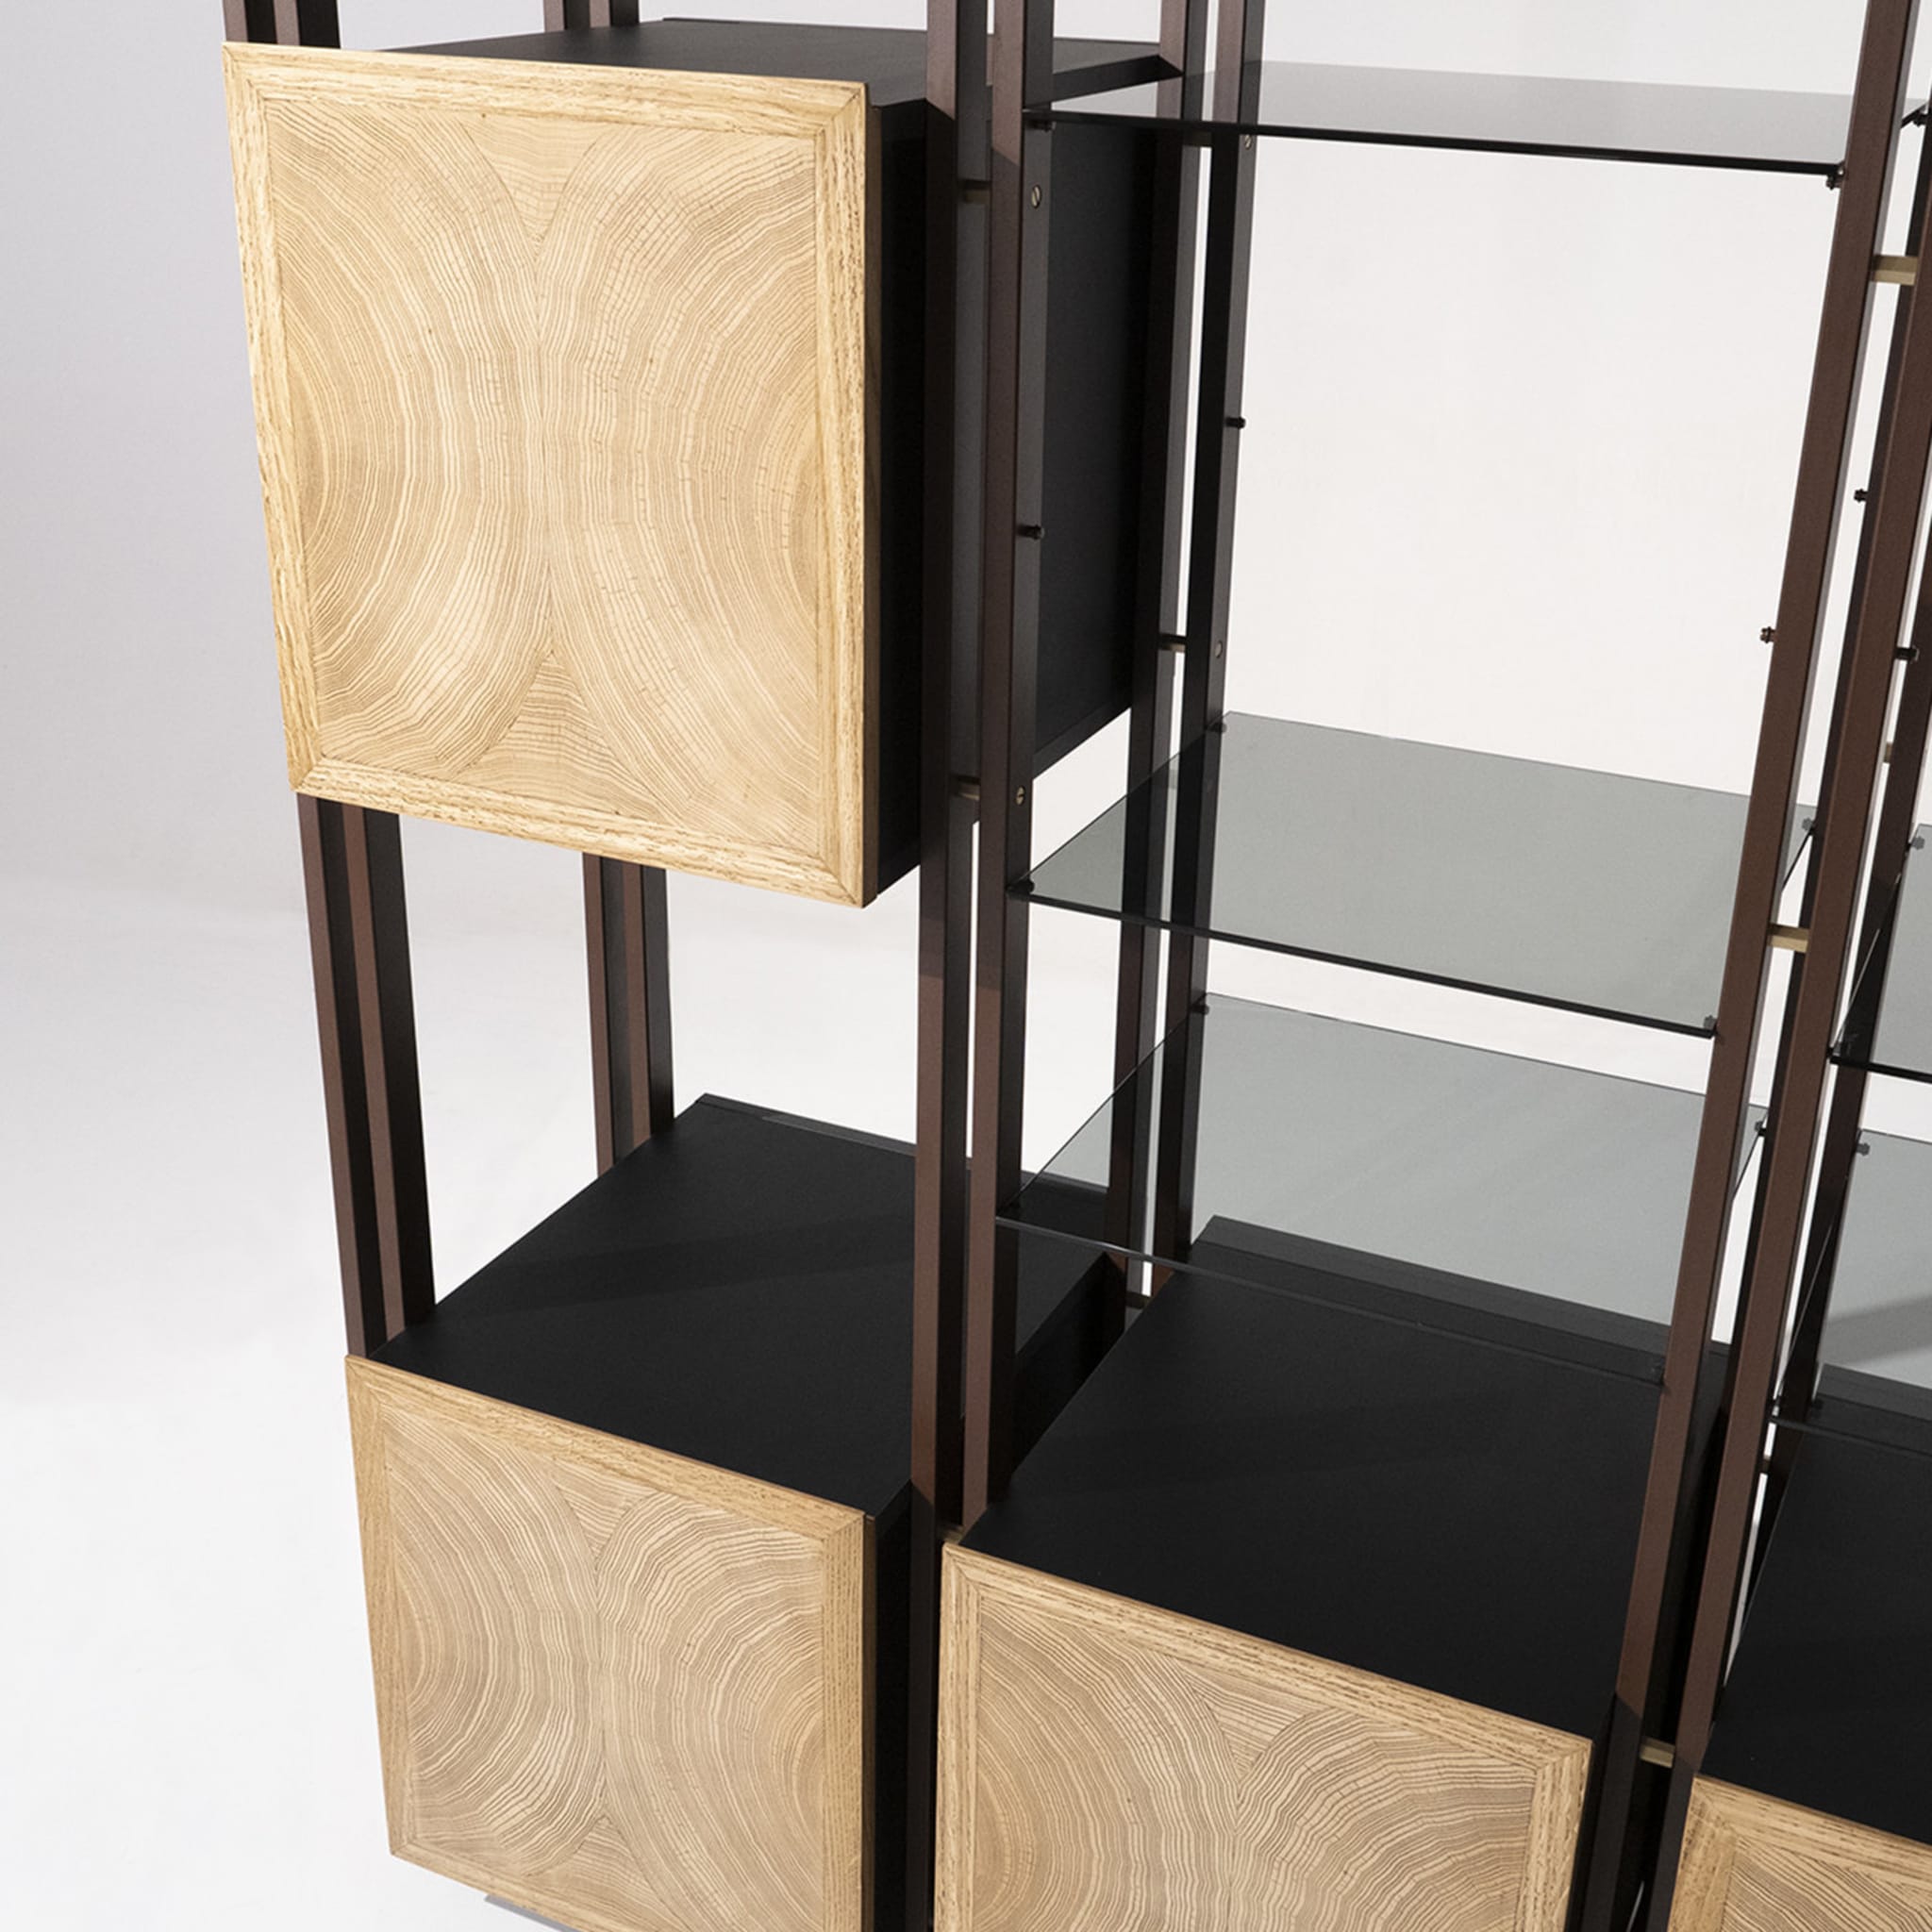 Tury Bookcase Tribeca Collection by Marco and Giulio Mantellassi  - Alternative view 2